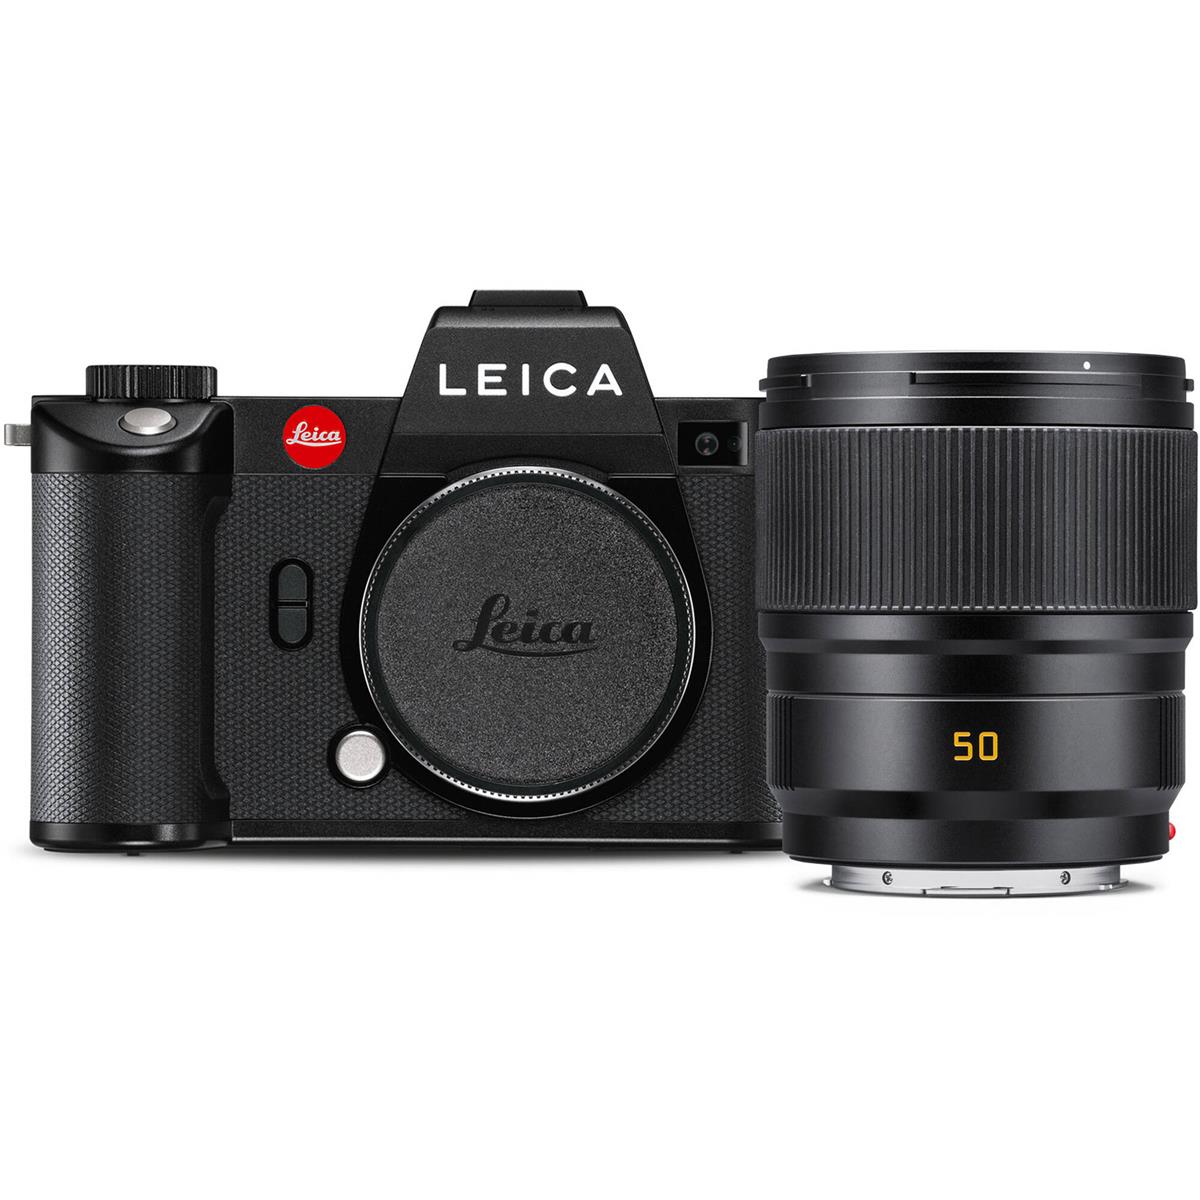 Image of Leica SL2 Mirrorless Camera with Summicron-SL 50mm f/2 ASPH Lens